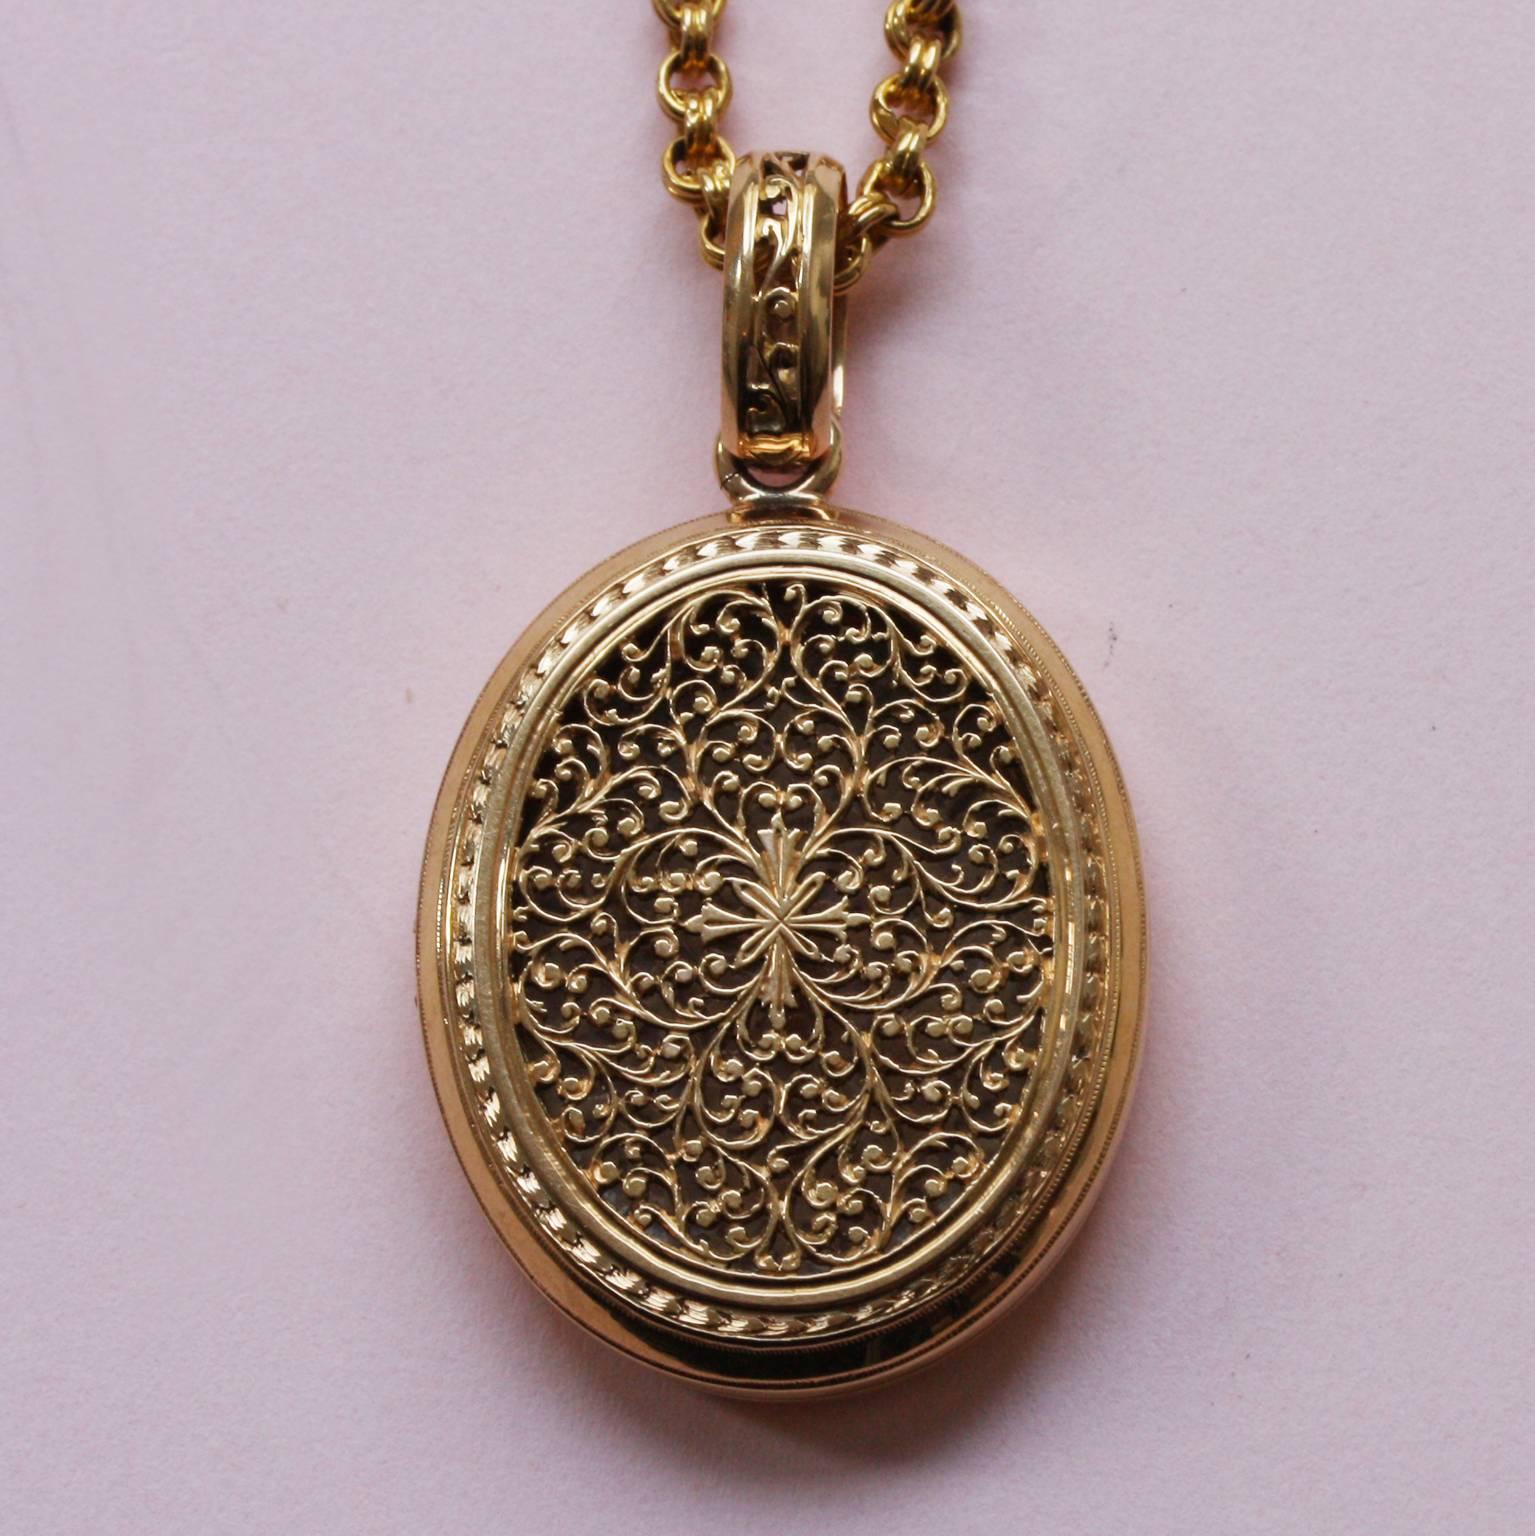 An 18 carat gold two sided locket each side has beautiful floral decorations, open worked in the gold, with the initial C on the front, Savoy, 19th century.

weight: 16.77 grams
dimensions: 4.5 x 2.5 cm